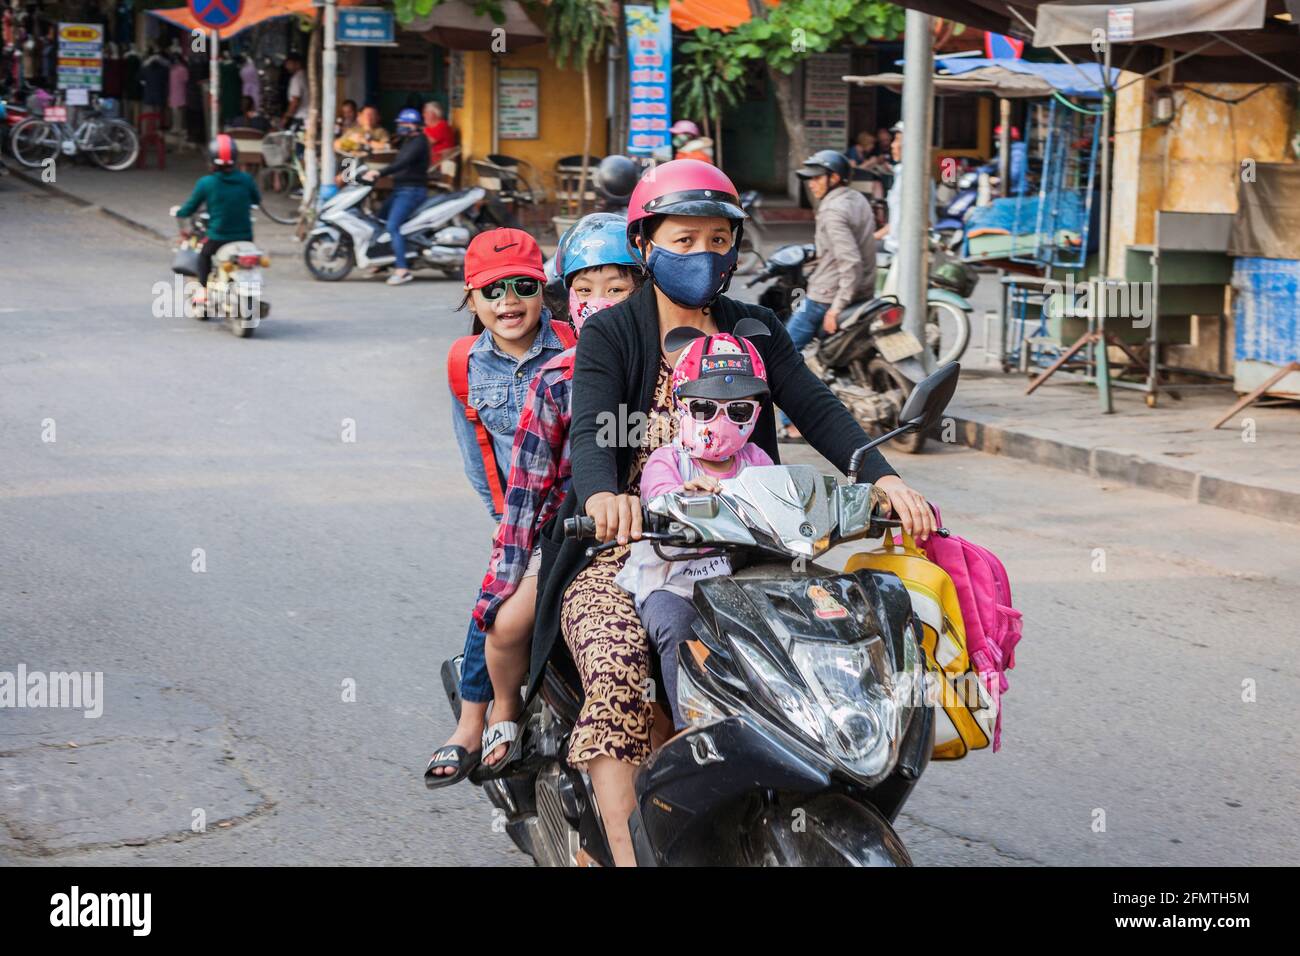 Family of four people crammed on scooter, Hoi An, Vietnam Stock Photo